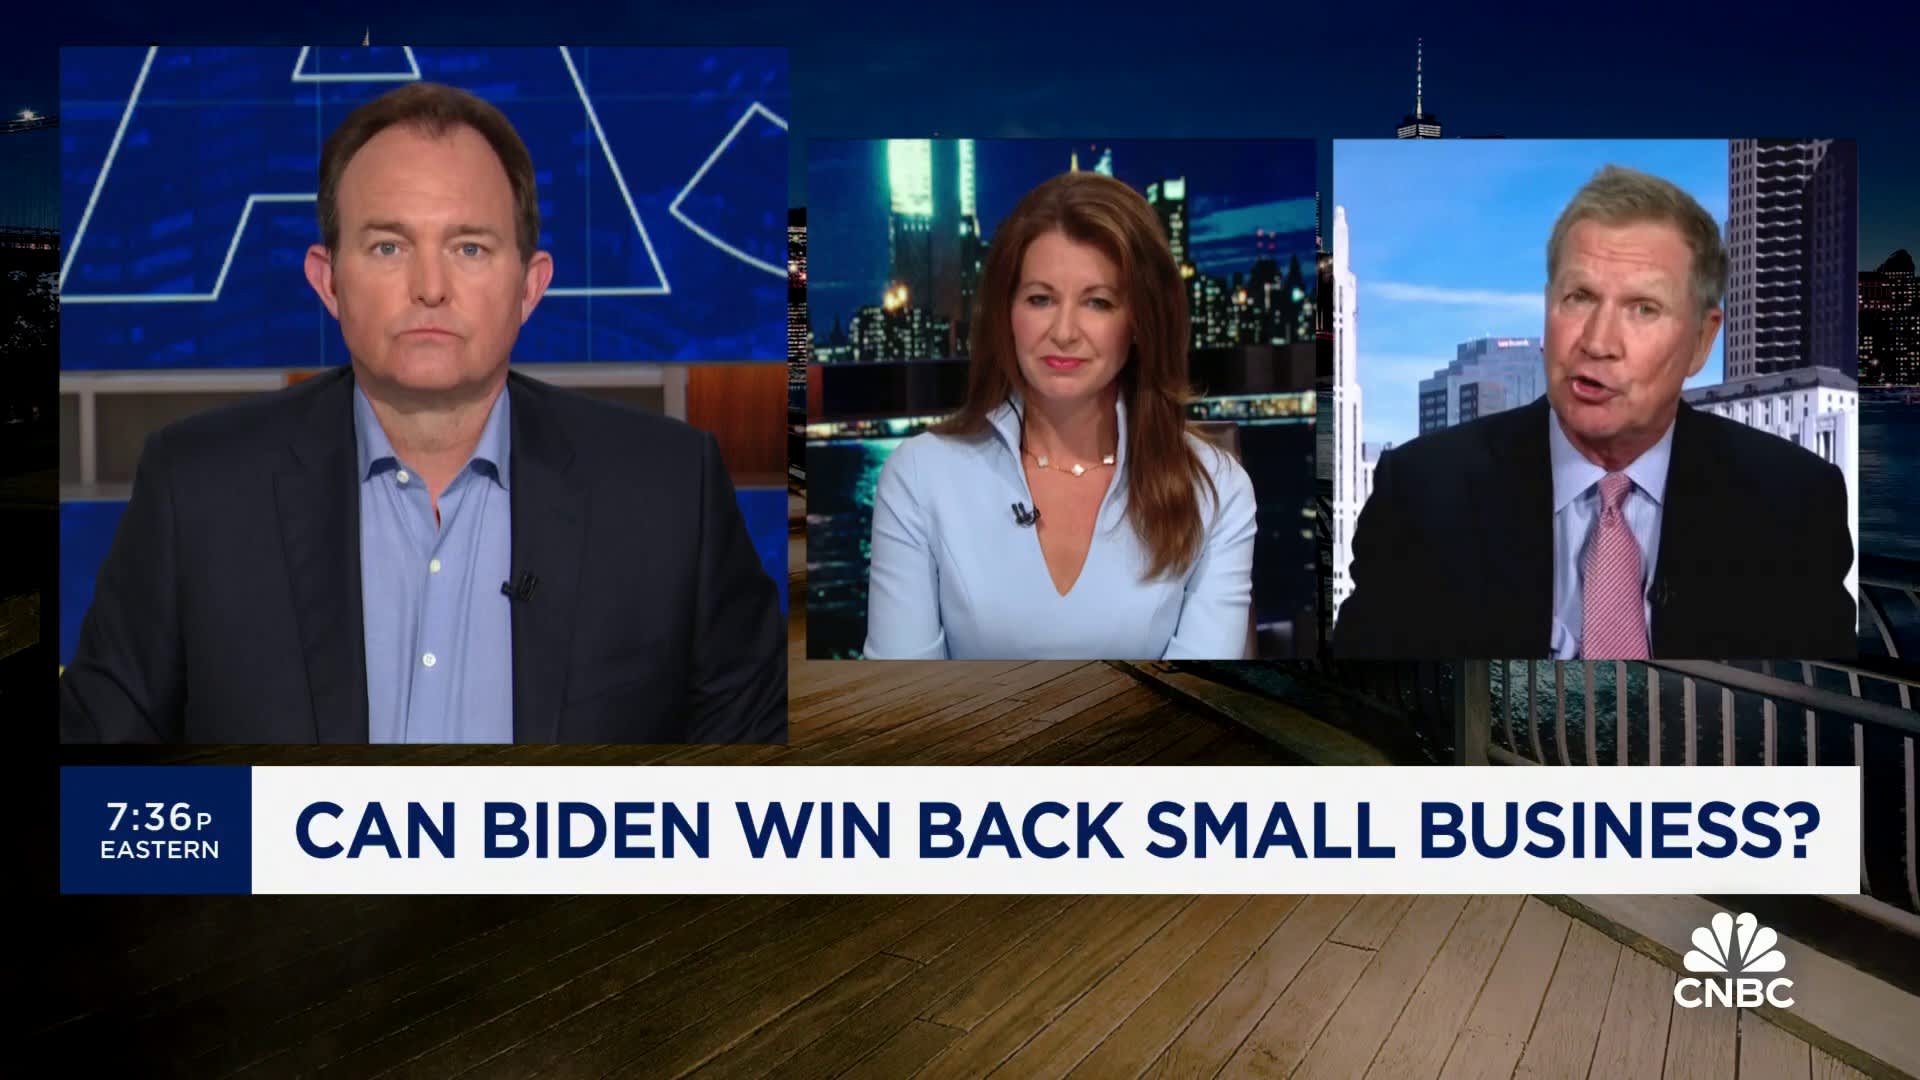 Last Call panel discusses if Biden can win back small businesses [Video]